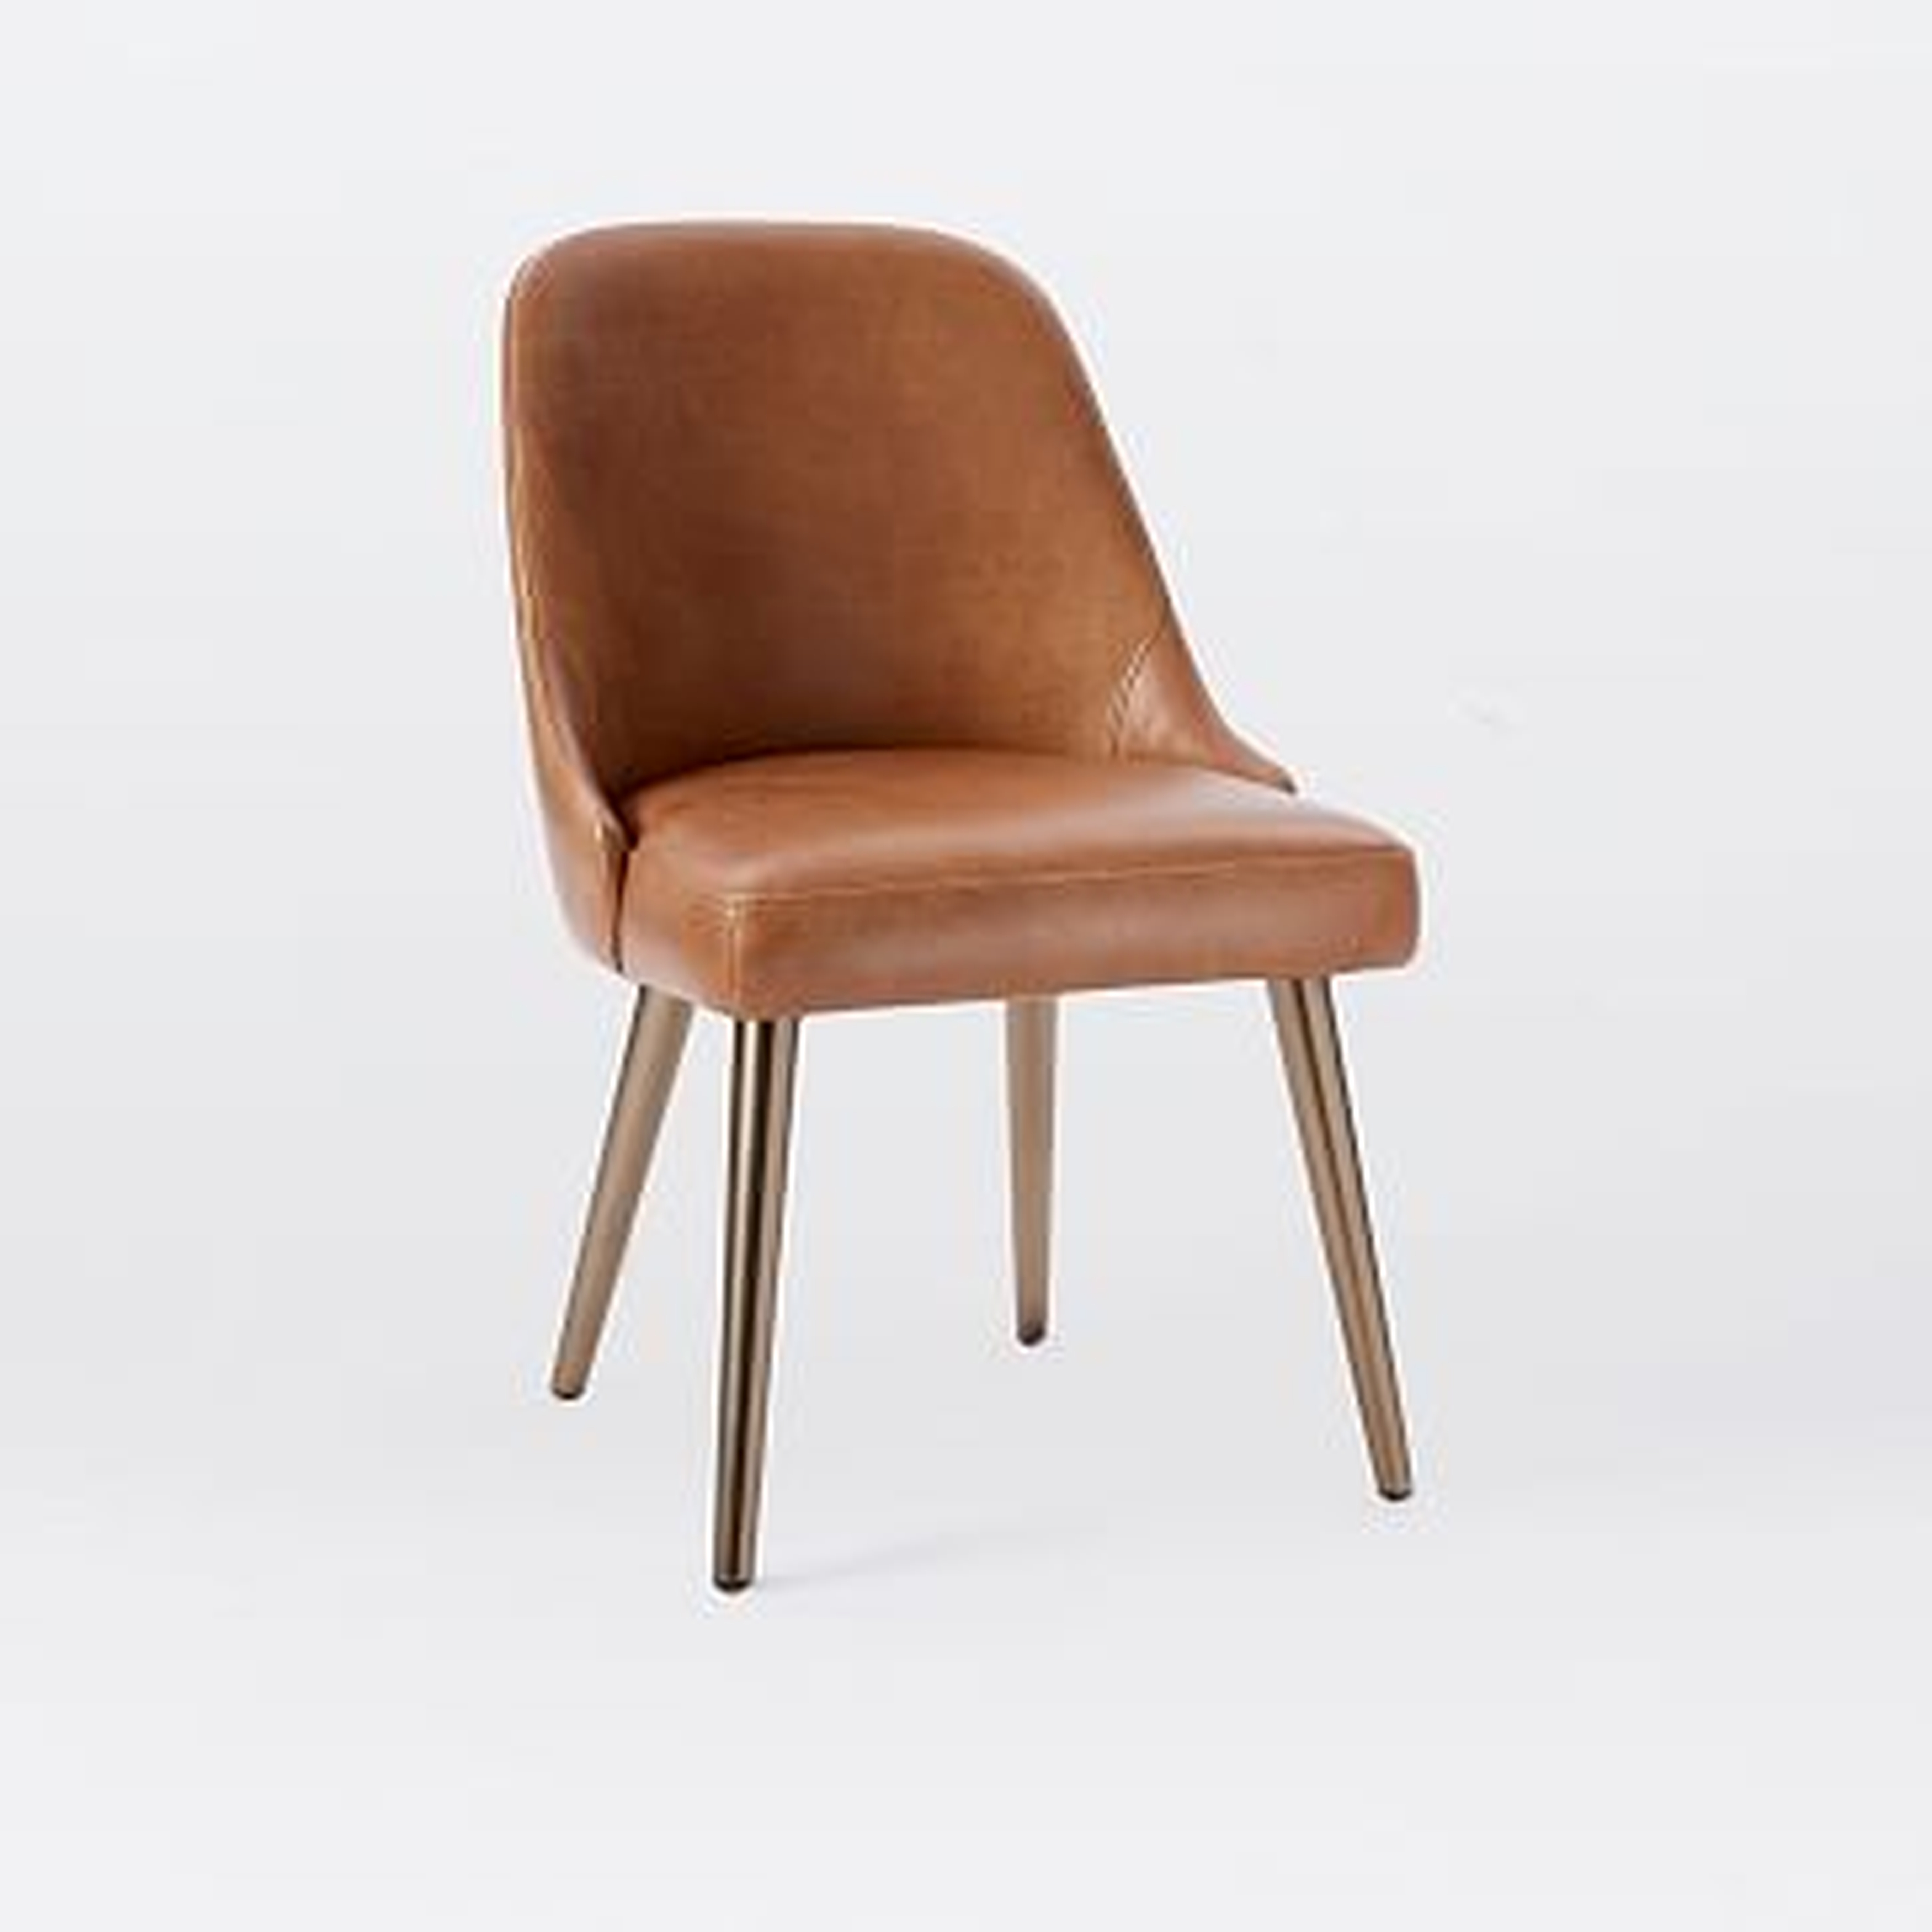 Mid-Century Dining Chair, Leather, Old Saddle Nut, Blackened Brass - West Elm